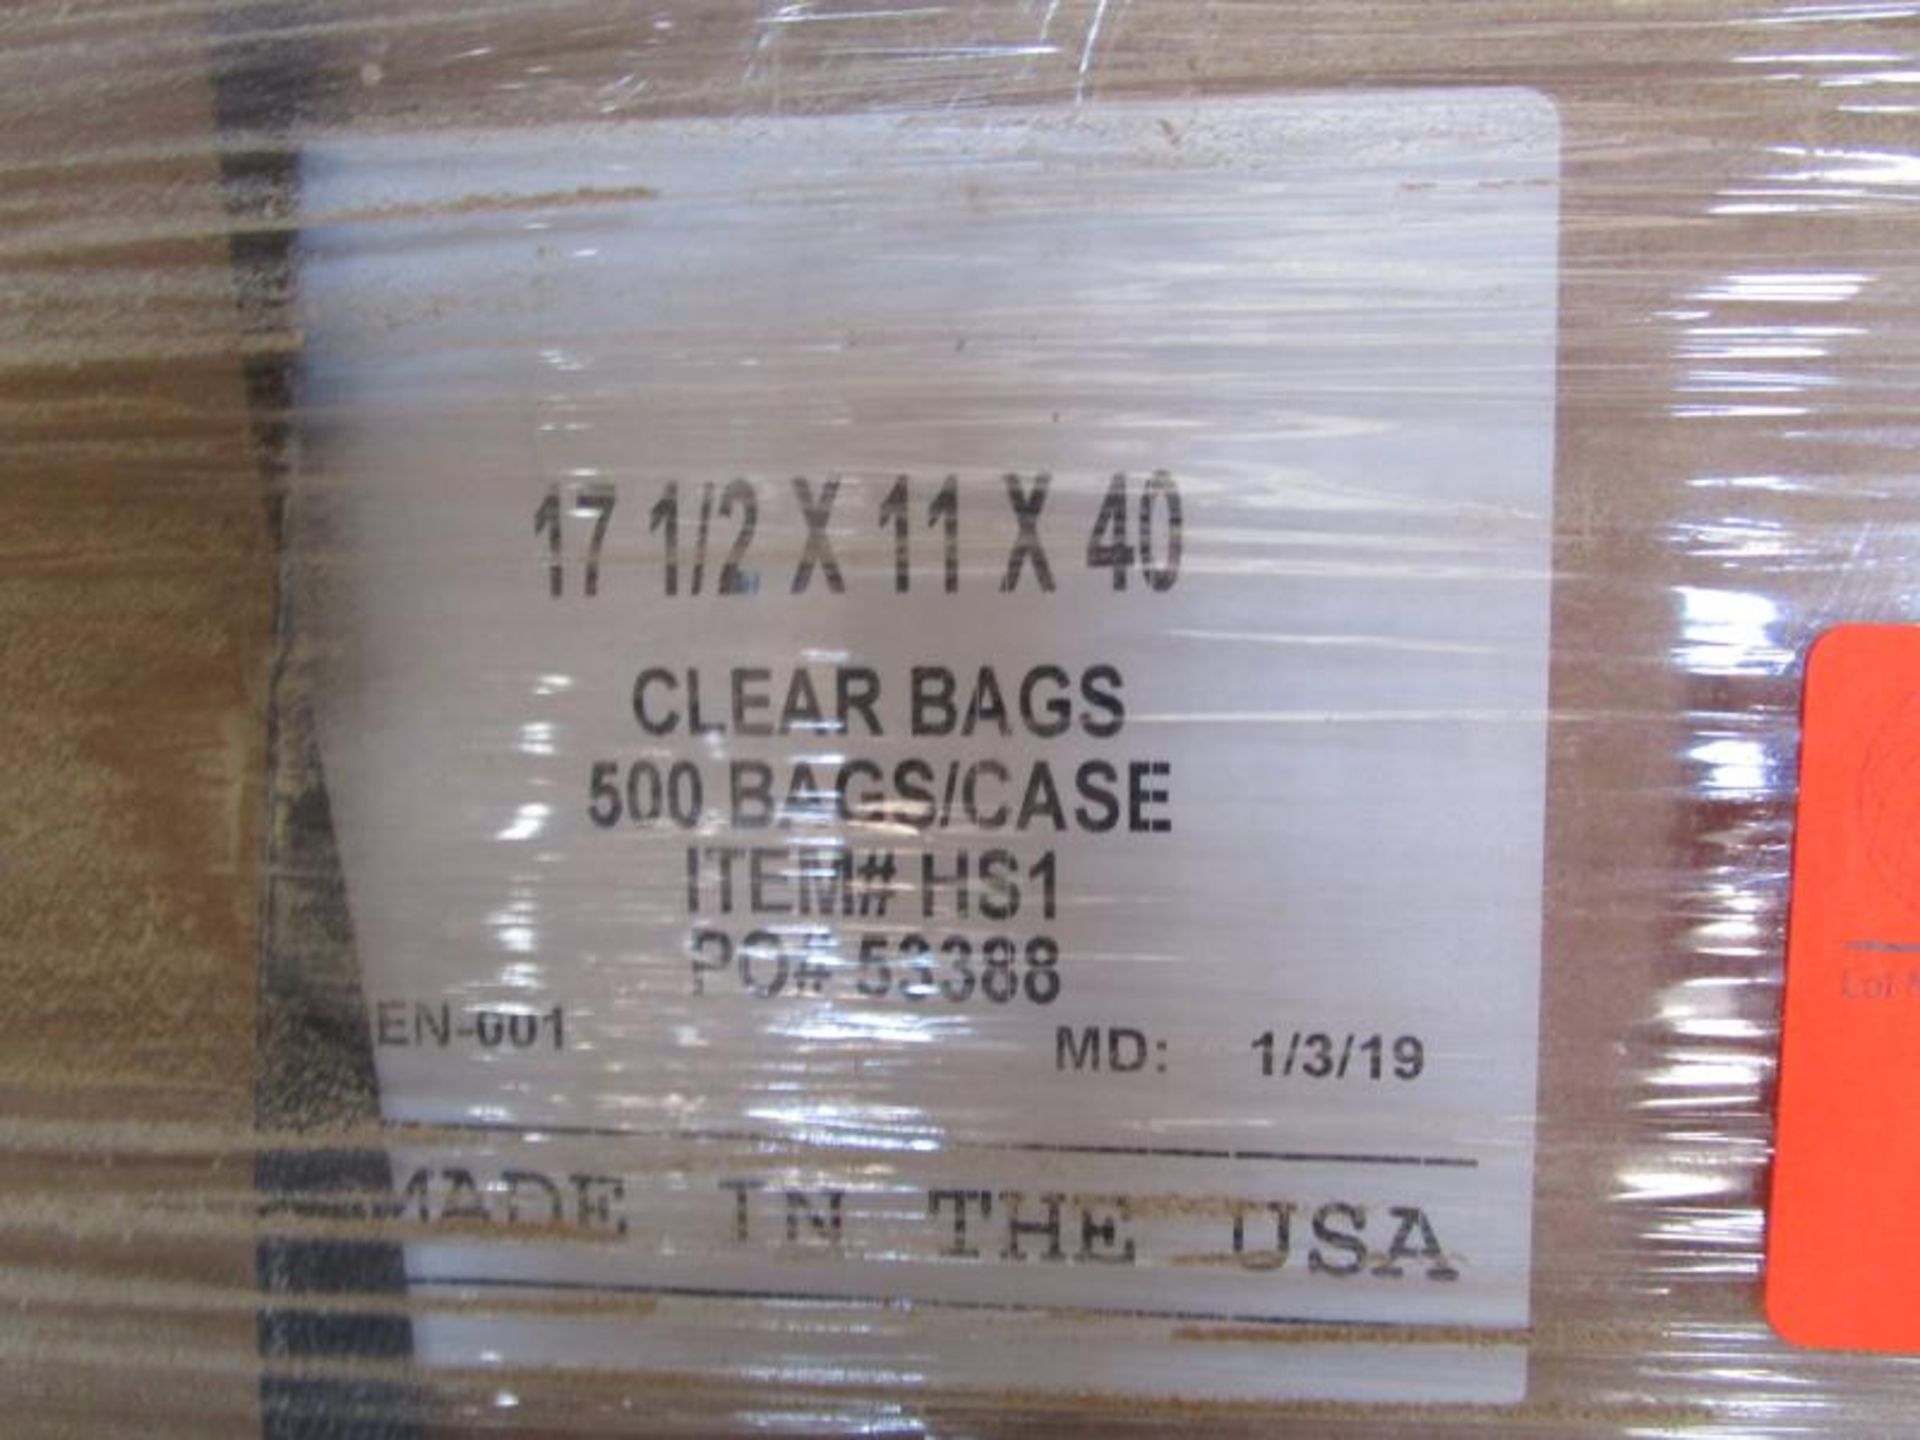 5 Pallets of 17.5" x 11" x 40" clear bags, 500 bags per case, 21 cases - Image 3 of 3